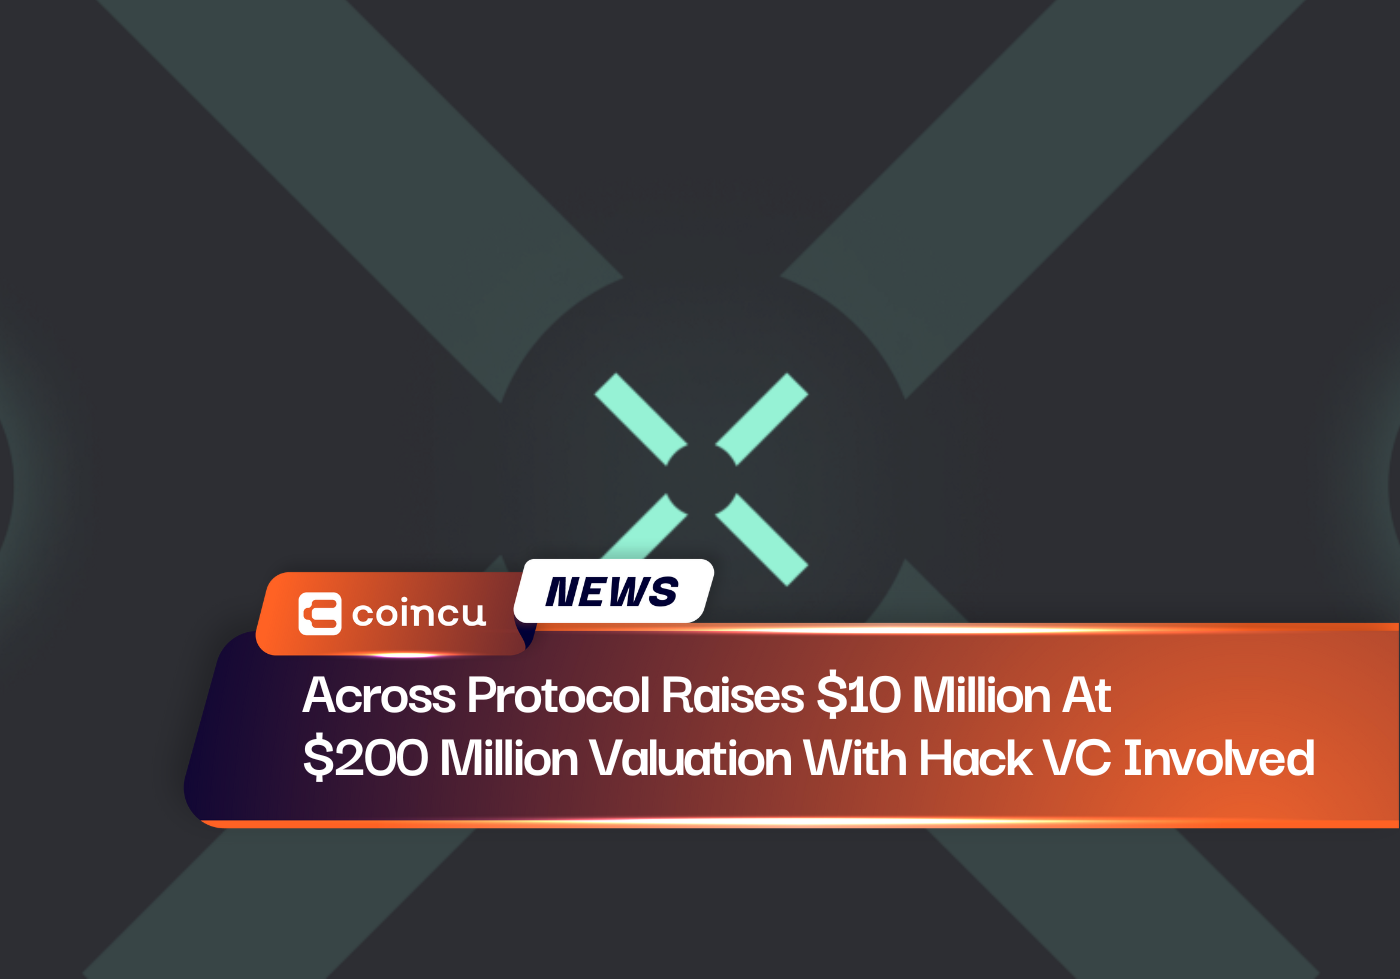 Across Protocol Raises $10 Million At $200 Million Valuation With Hack VC Involved